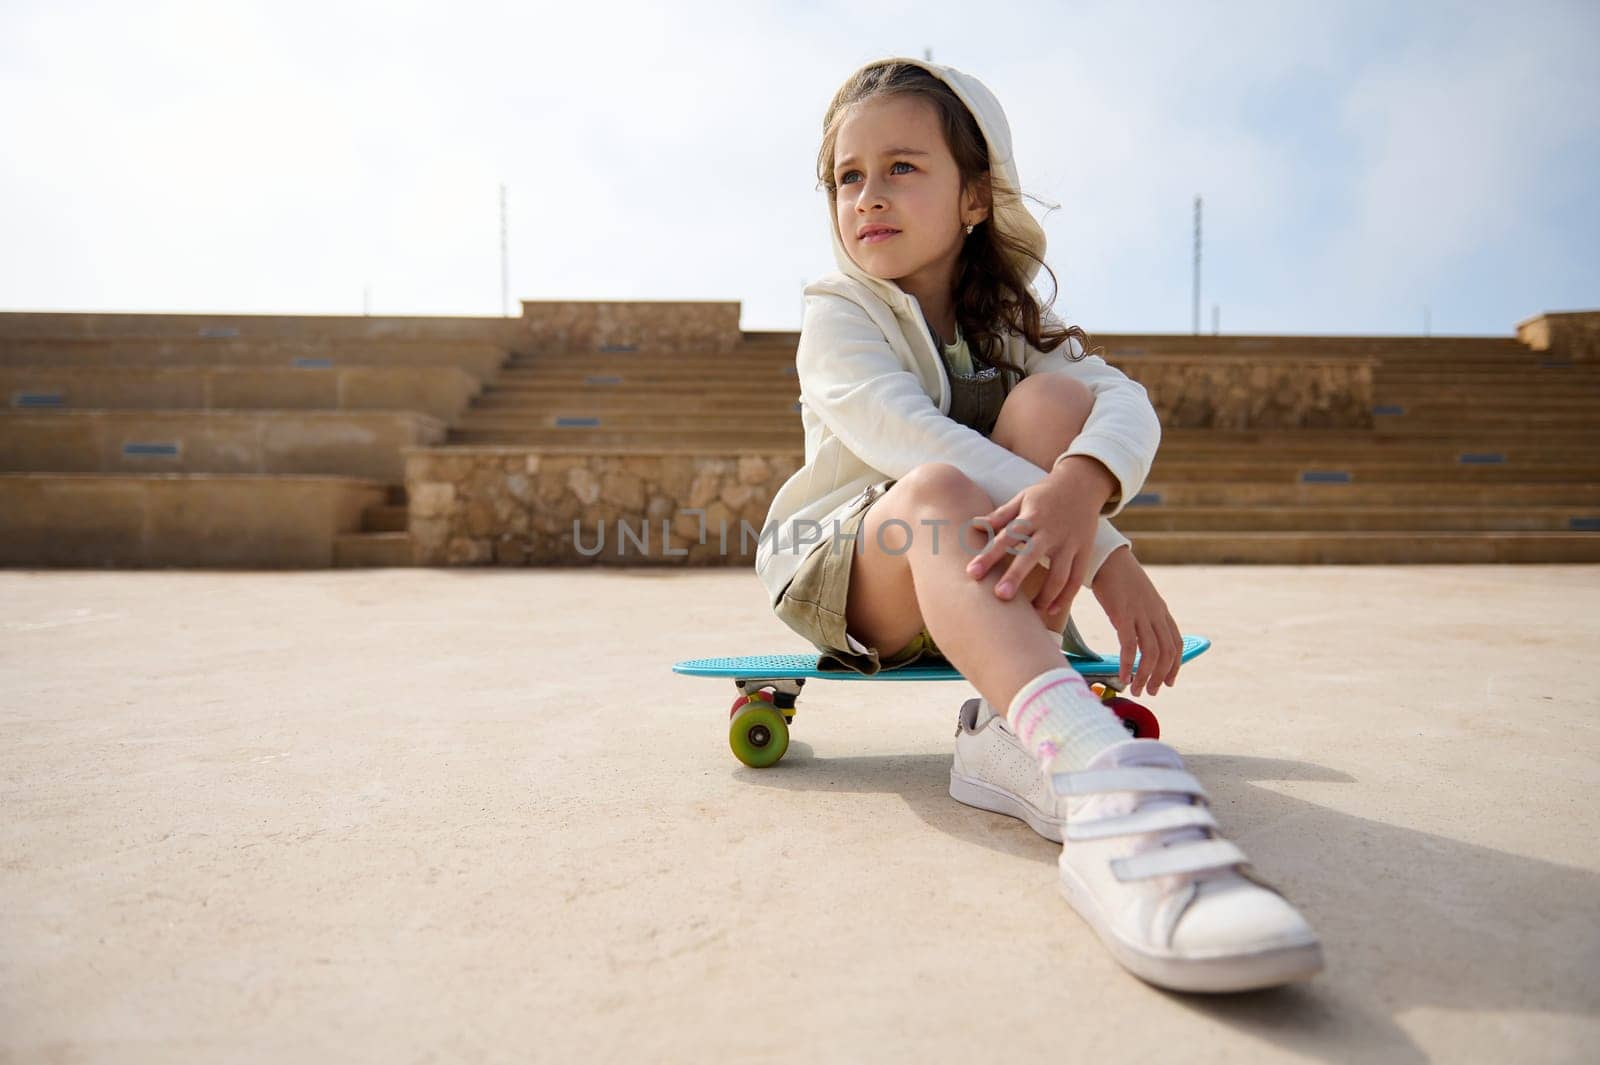 Lovely child girl dreamily looking away, sitting on her blue skateboard with multicolored wheels, on the urban skatepark by artgf